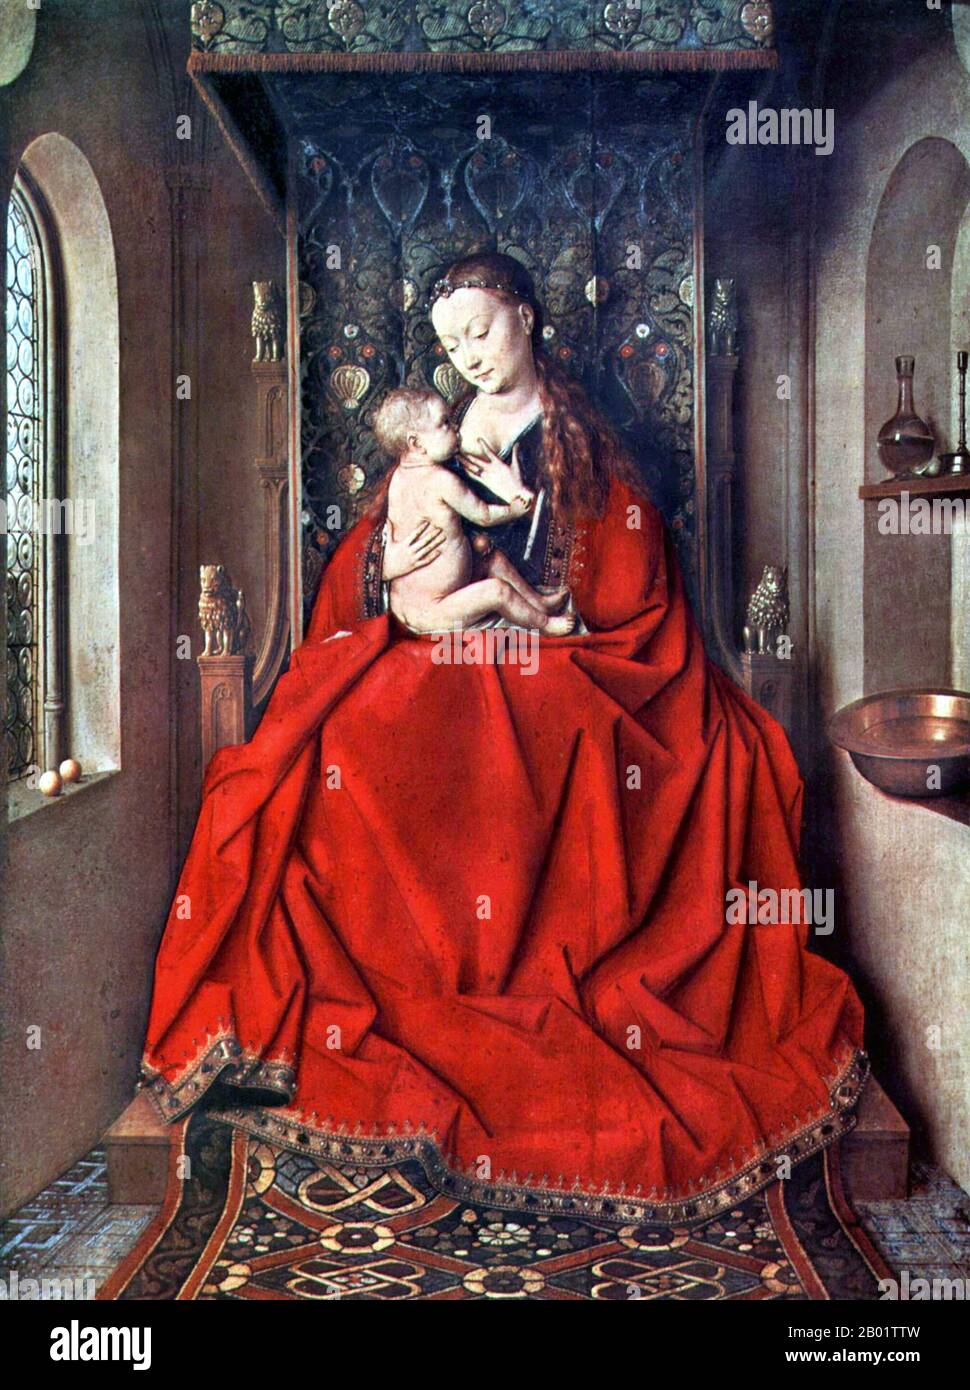 Netherlands: 'Lucca Madonna'. Oil on wood painting by Jan van Eyck (c. 1390-1441), c. 1430  Jan van Eyck was a Flemish painter primarily active in Bruges, one of the early innovators of what would become known as Early Netherlandish painting. A major representative of Early Northern Renaissance art, he worked in the courts of multiple rulers and nobles, such as Philip the Good, Duke of Burgundy. Highly regarded by Philip, Jan often travelled in his name during diplomatic visits. Around 20 paintings are confidently attributed to him. Stock Photo